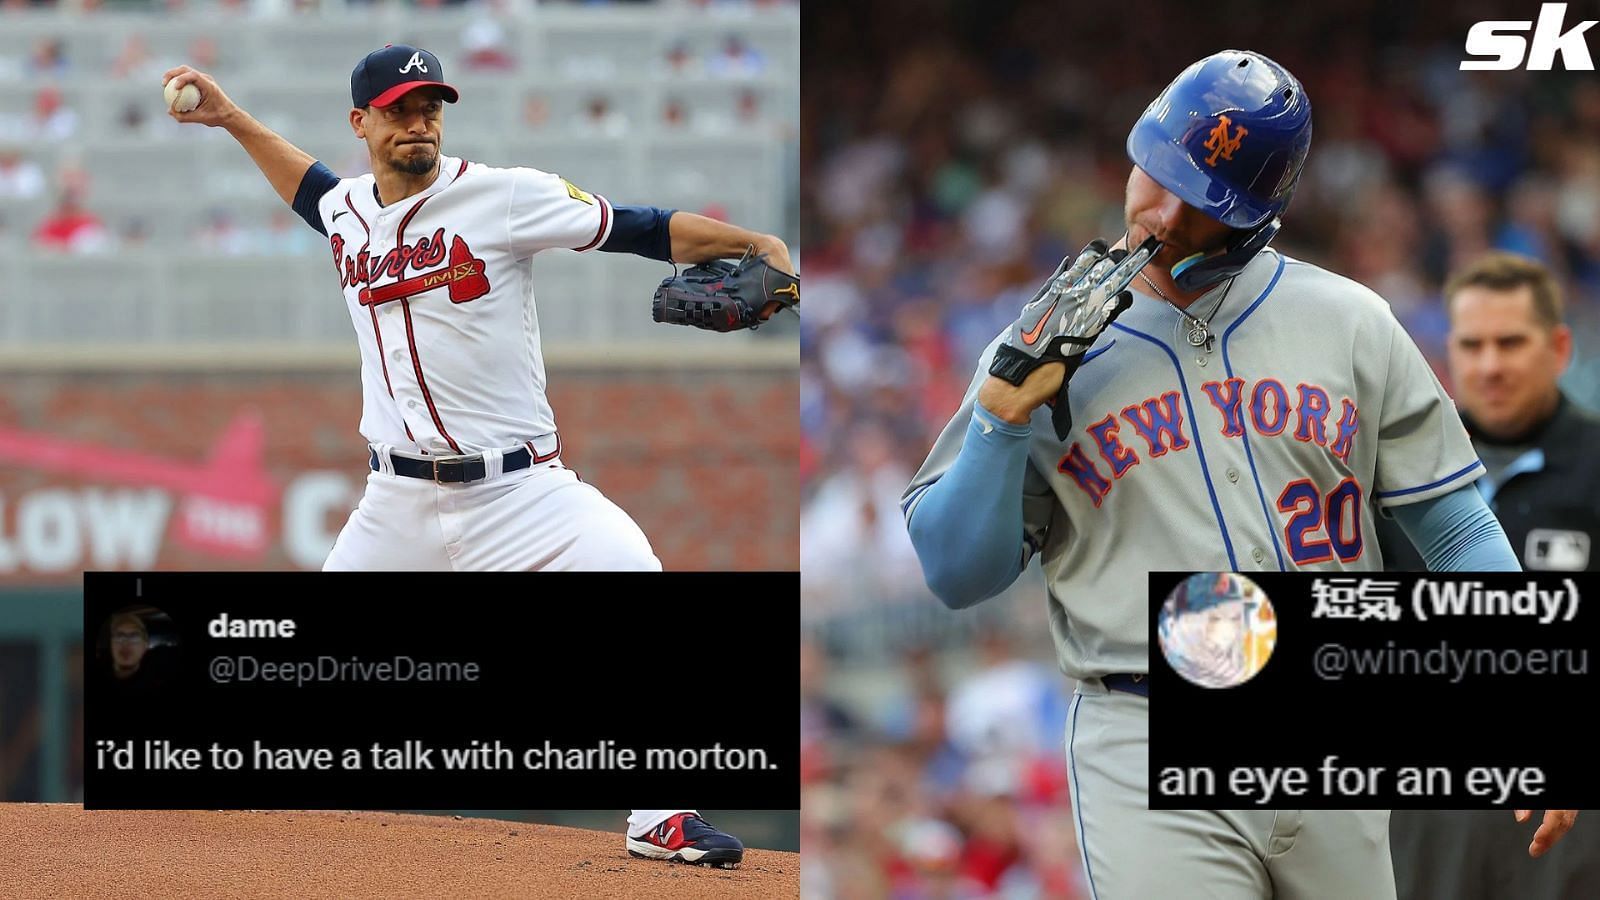 New York Mets fans want revenge as Pete Alonso set to miss 3-4 weeks with  wrist injury: I'd like to have a talk with Charlie Morton